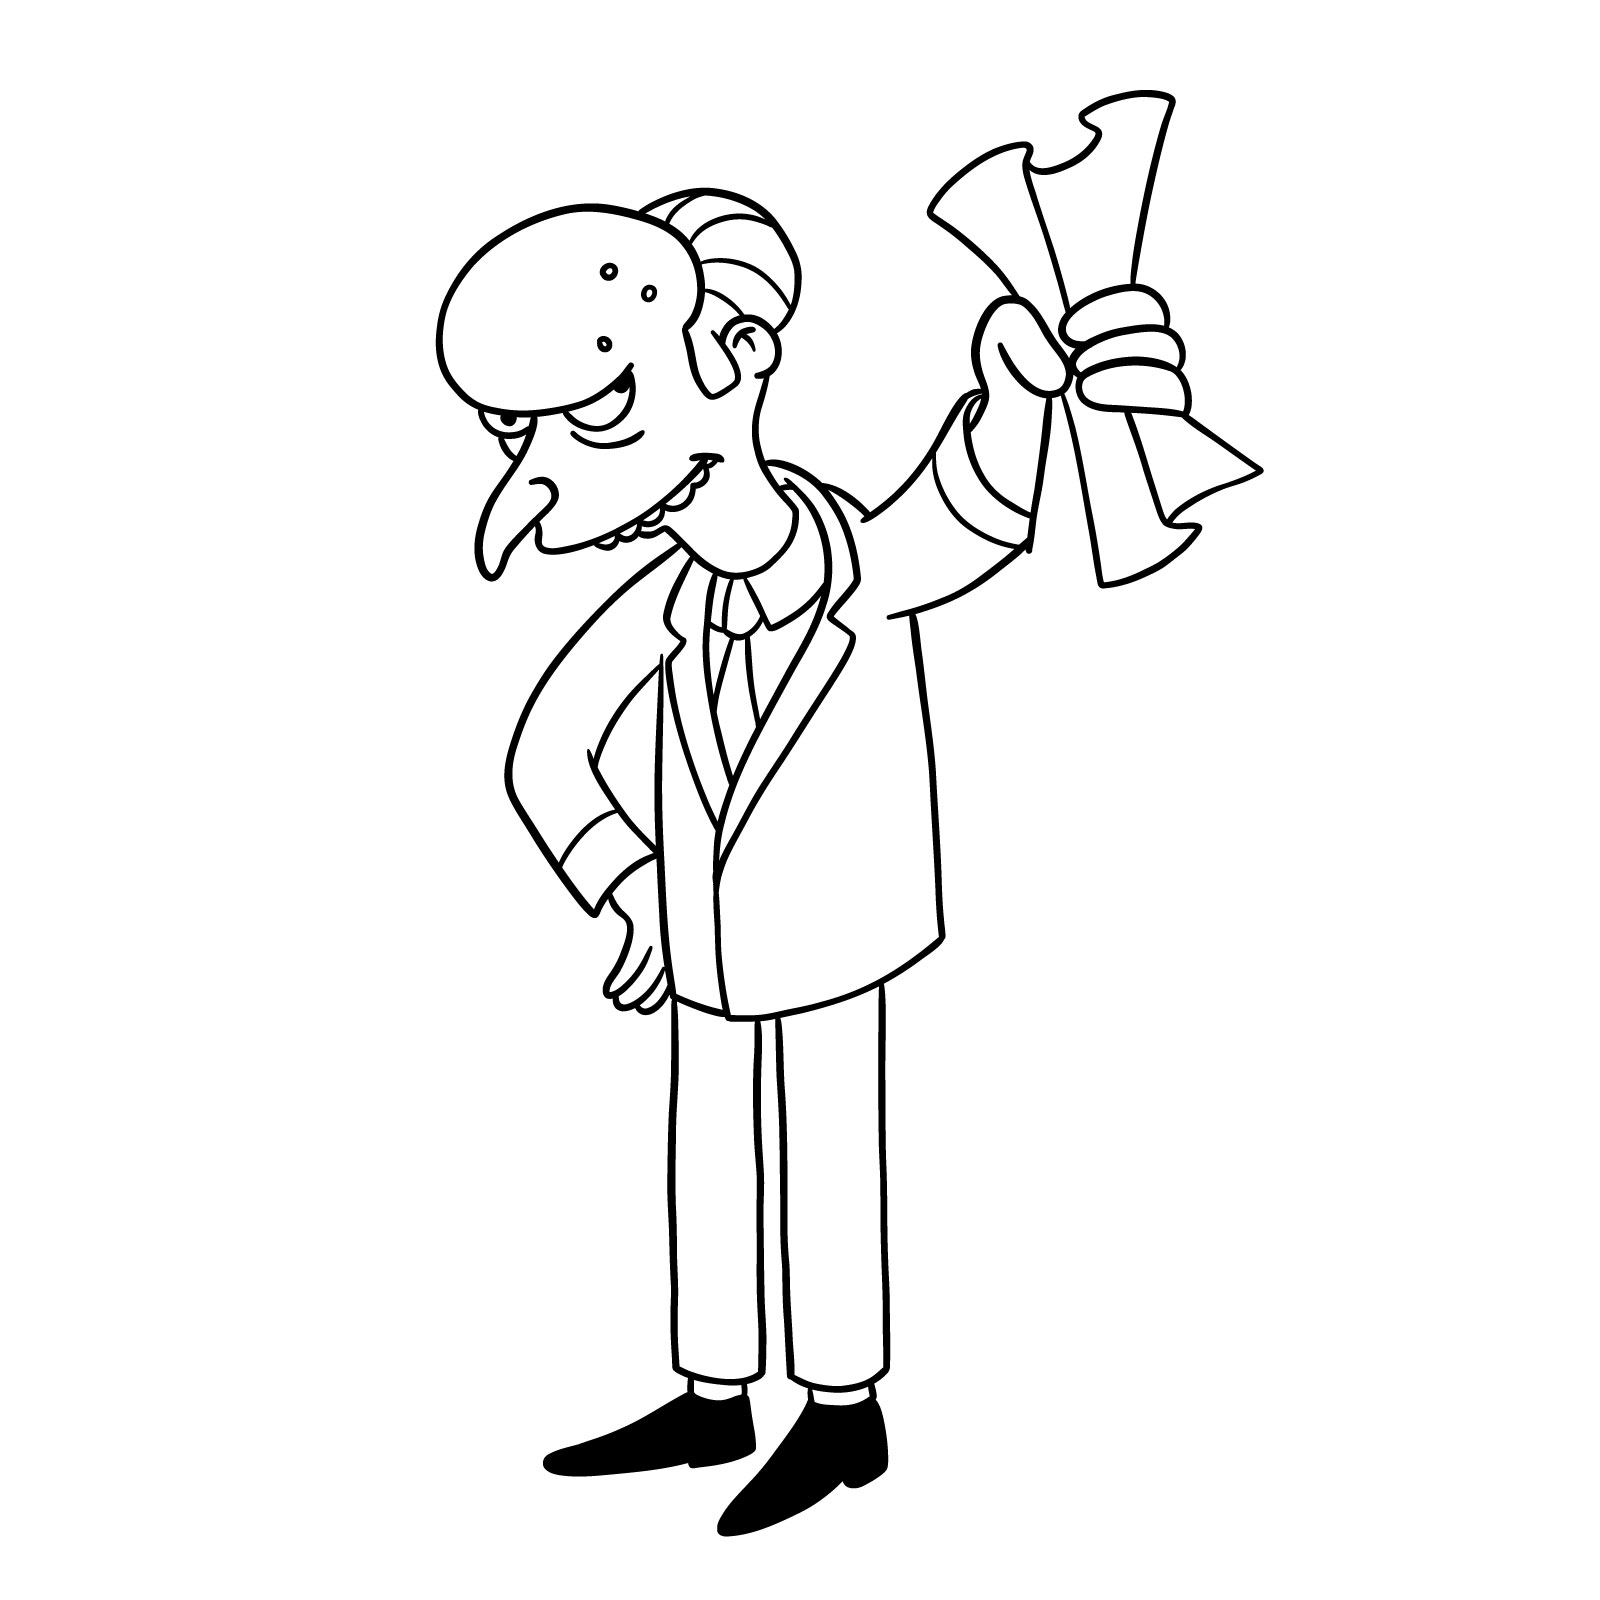 How to draw Monty Burns with dollars in his hand - step 27